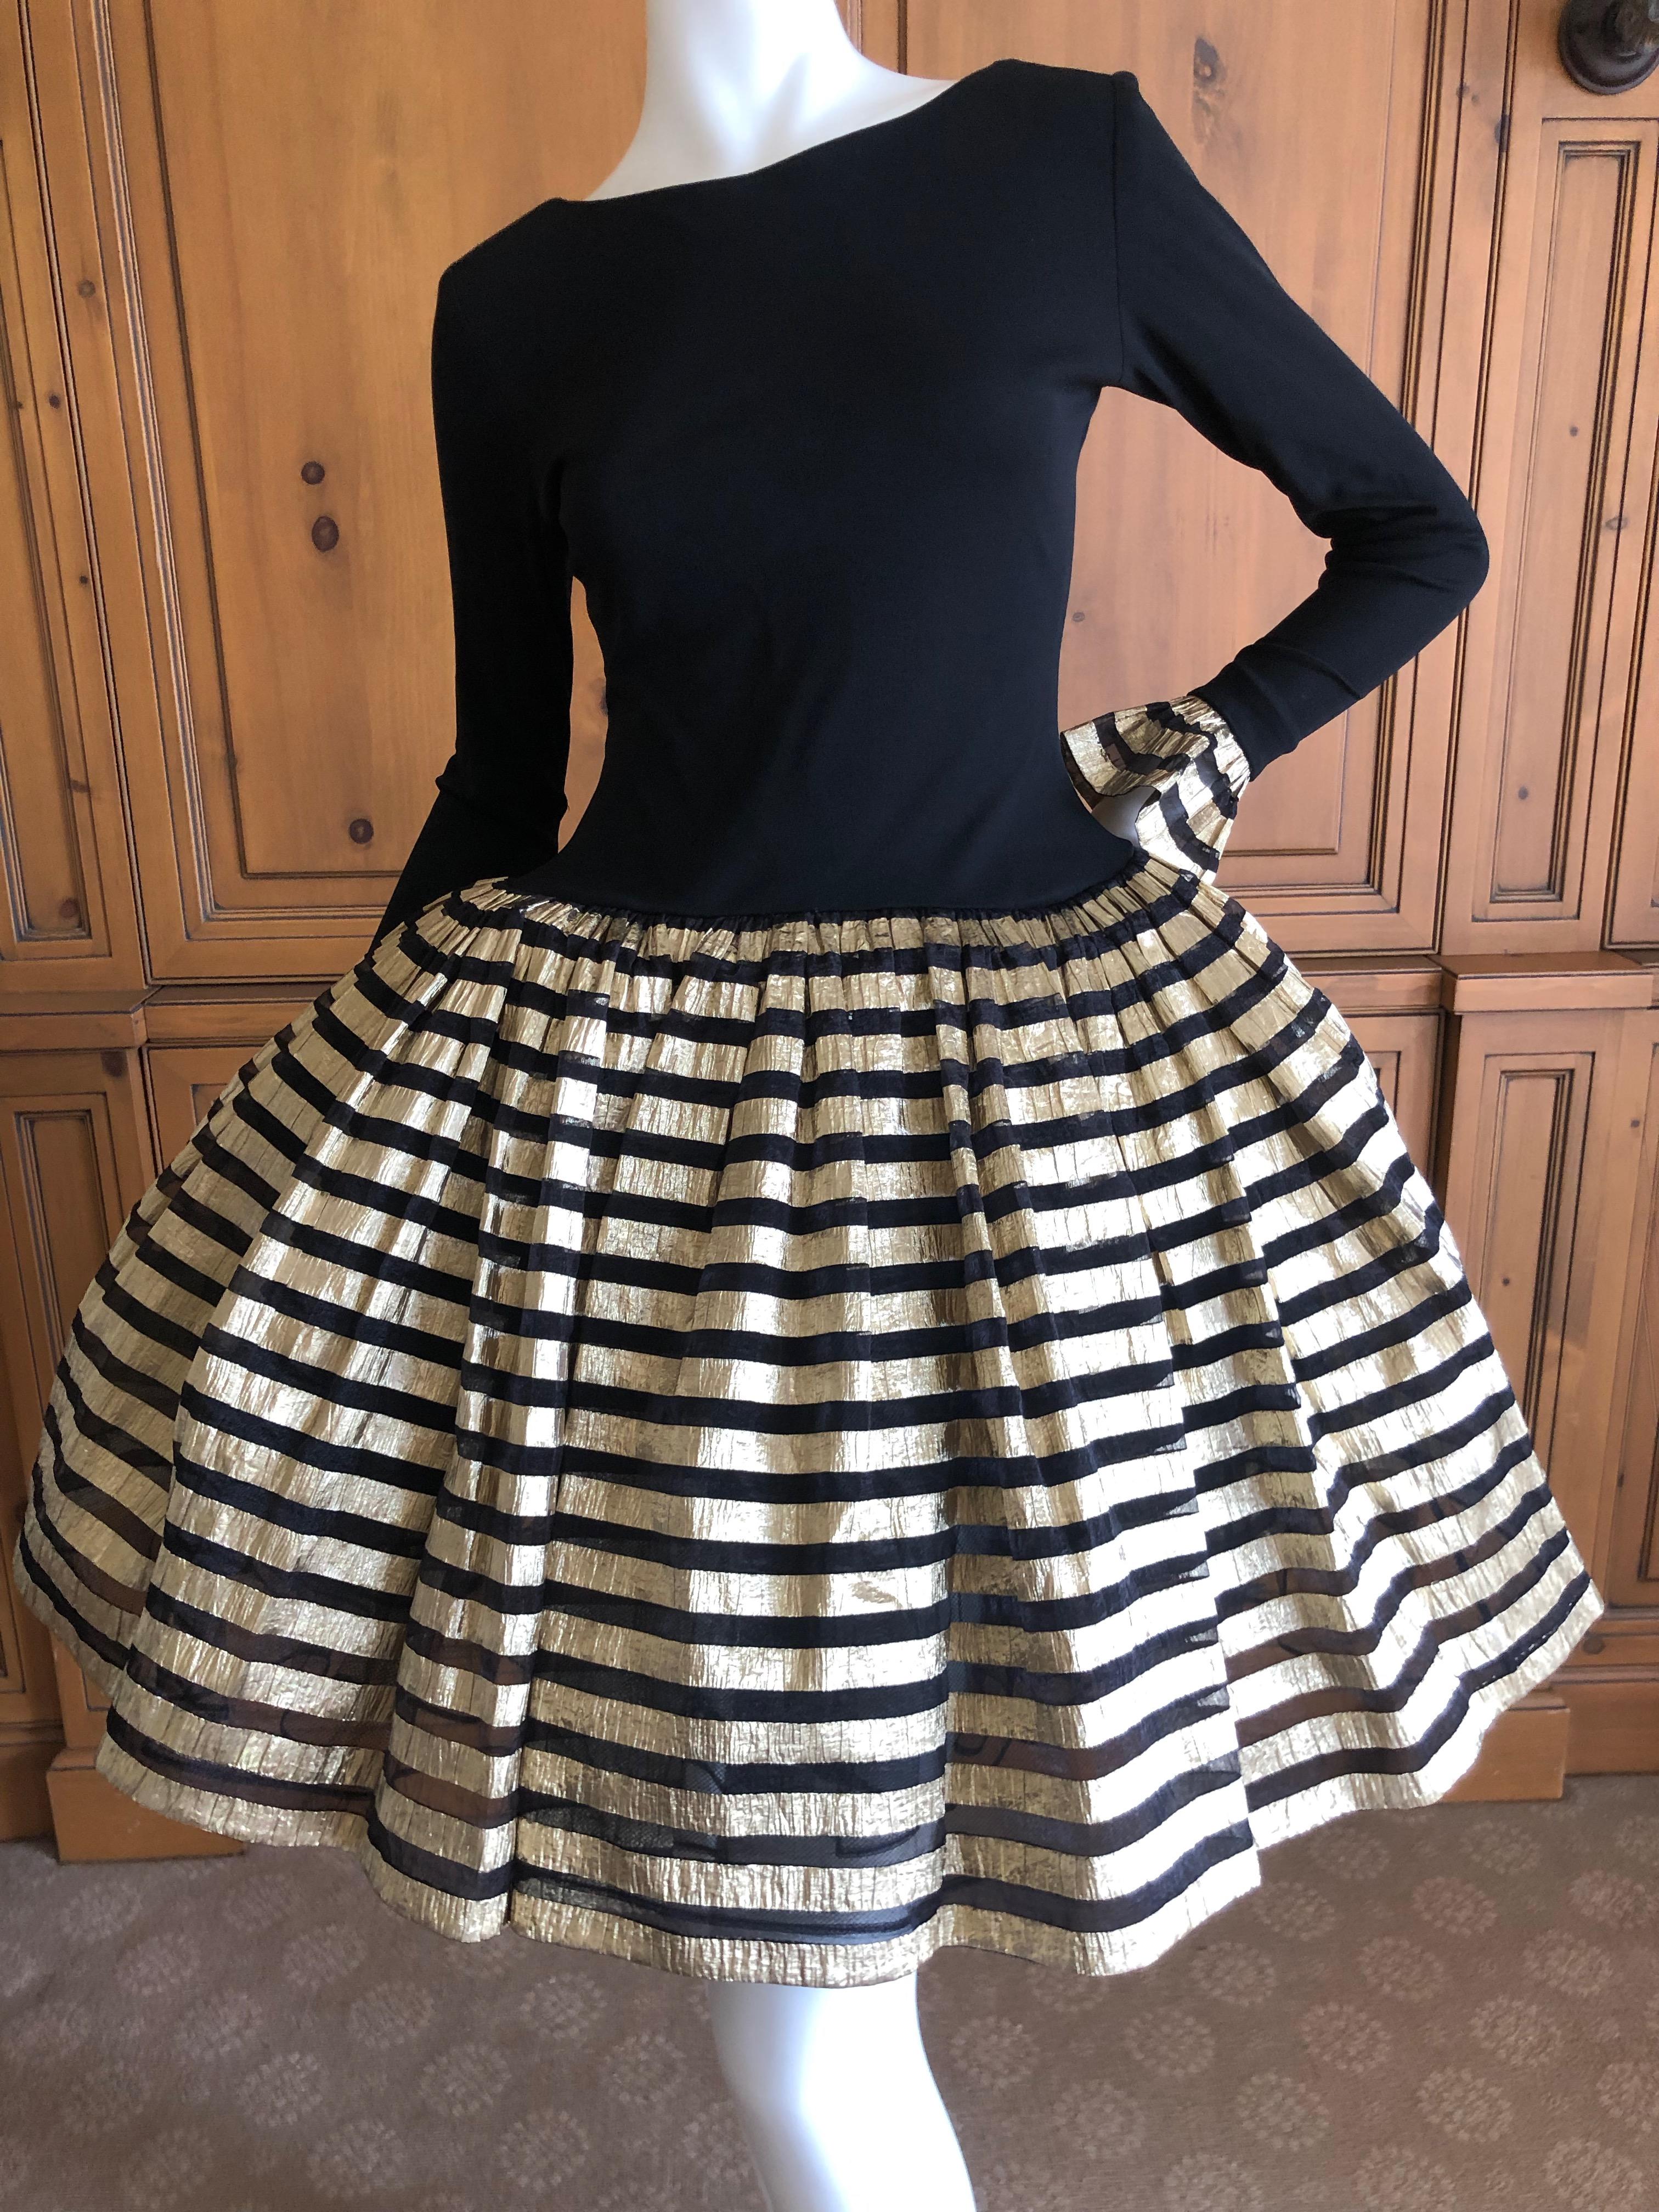 Bob Mackie Gold and Black Vintage Cocktail Dress w Ballerina Skirt & Petticoats
Size 6
So much prettier than the photos, please use zoom feature to see details, the gold is much shinier in person.

Bust 34